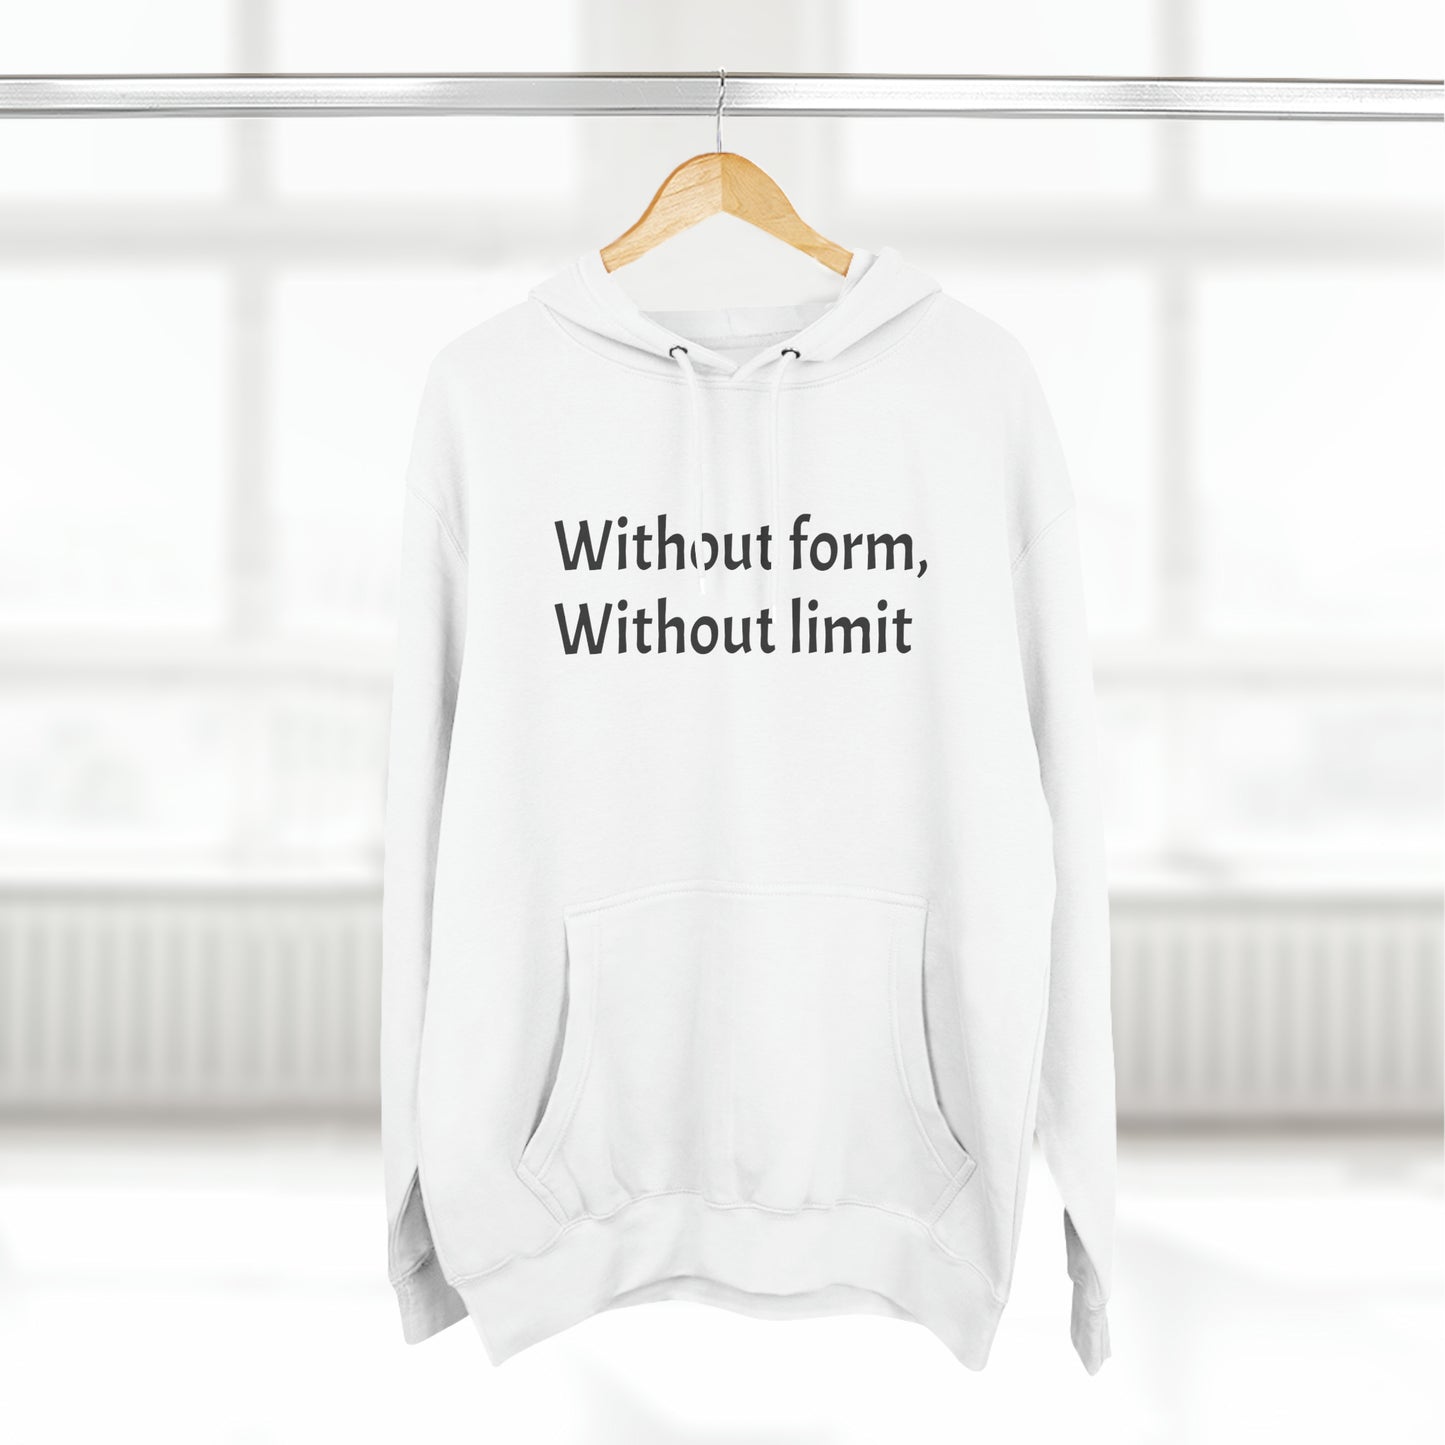 Without form, Without limit